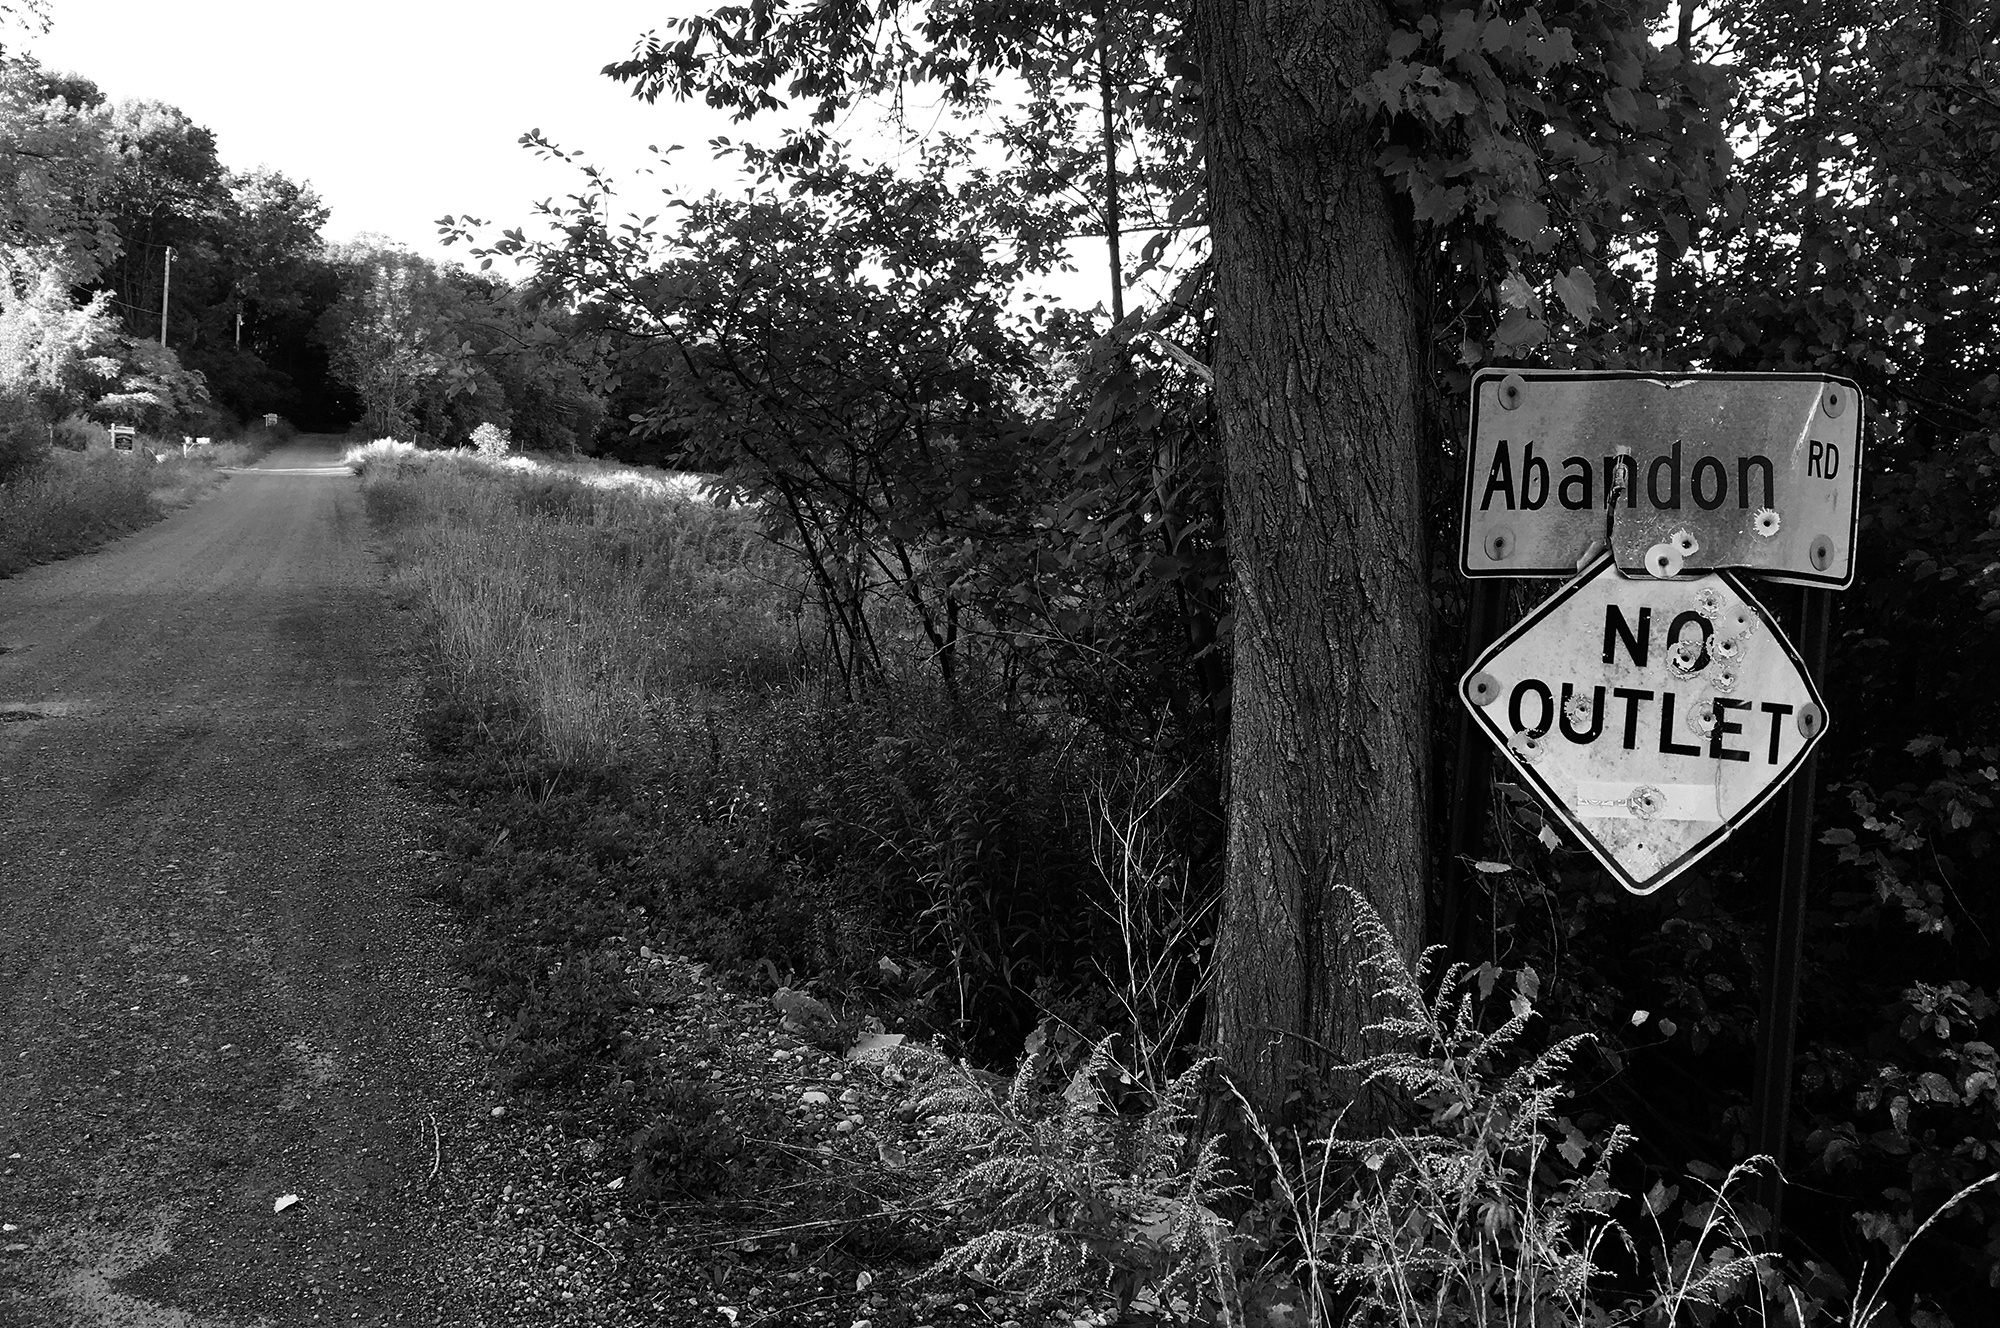 Road with signs that say Abandon Rd and No Outlet.